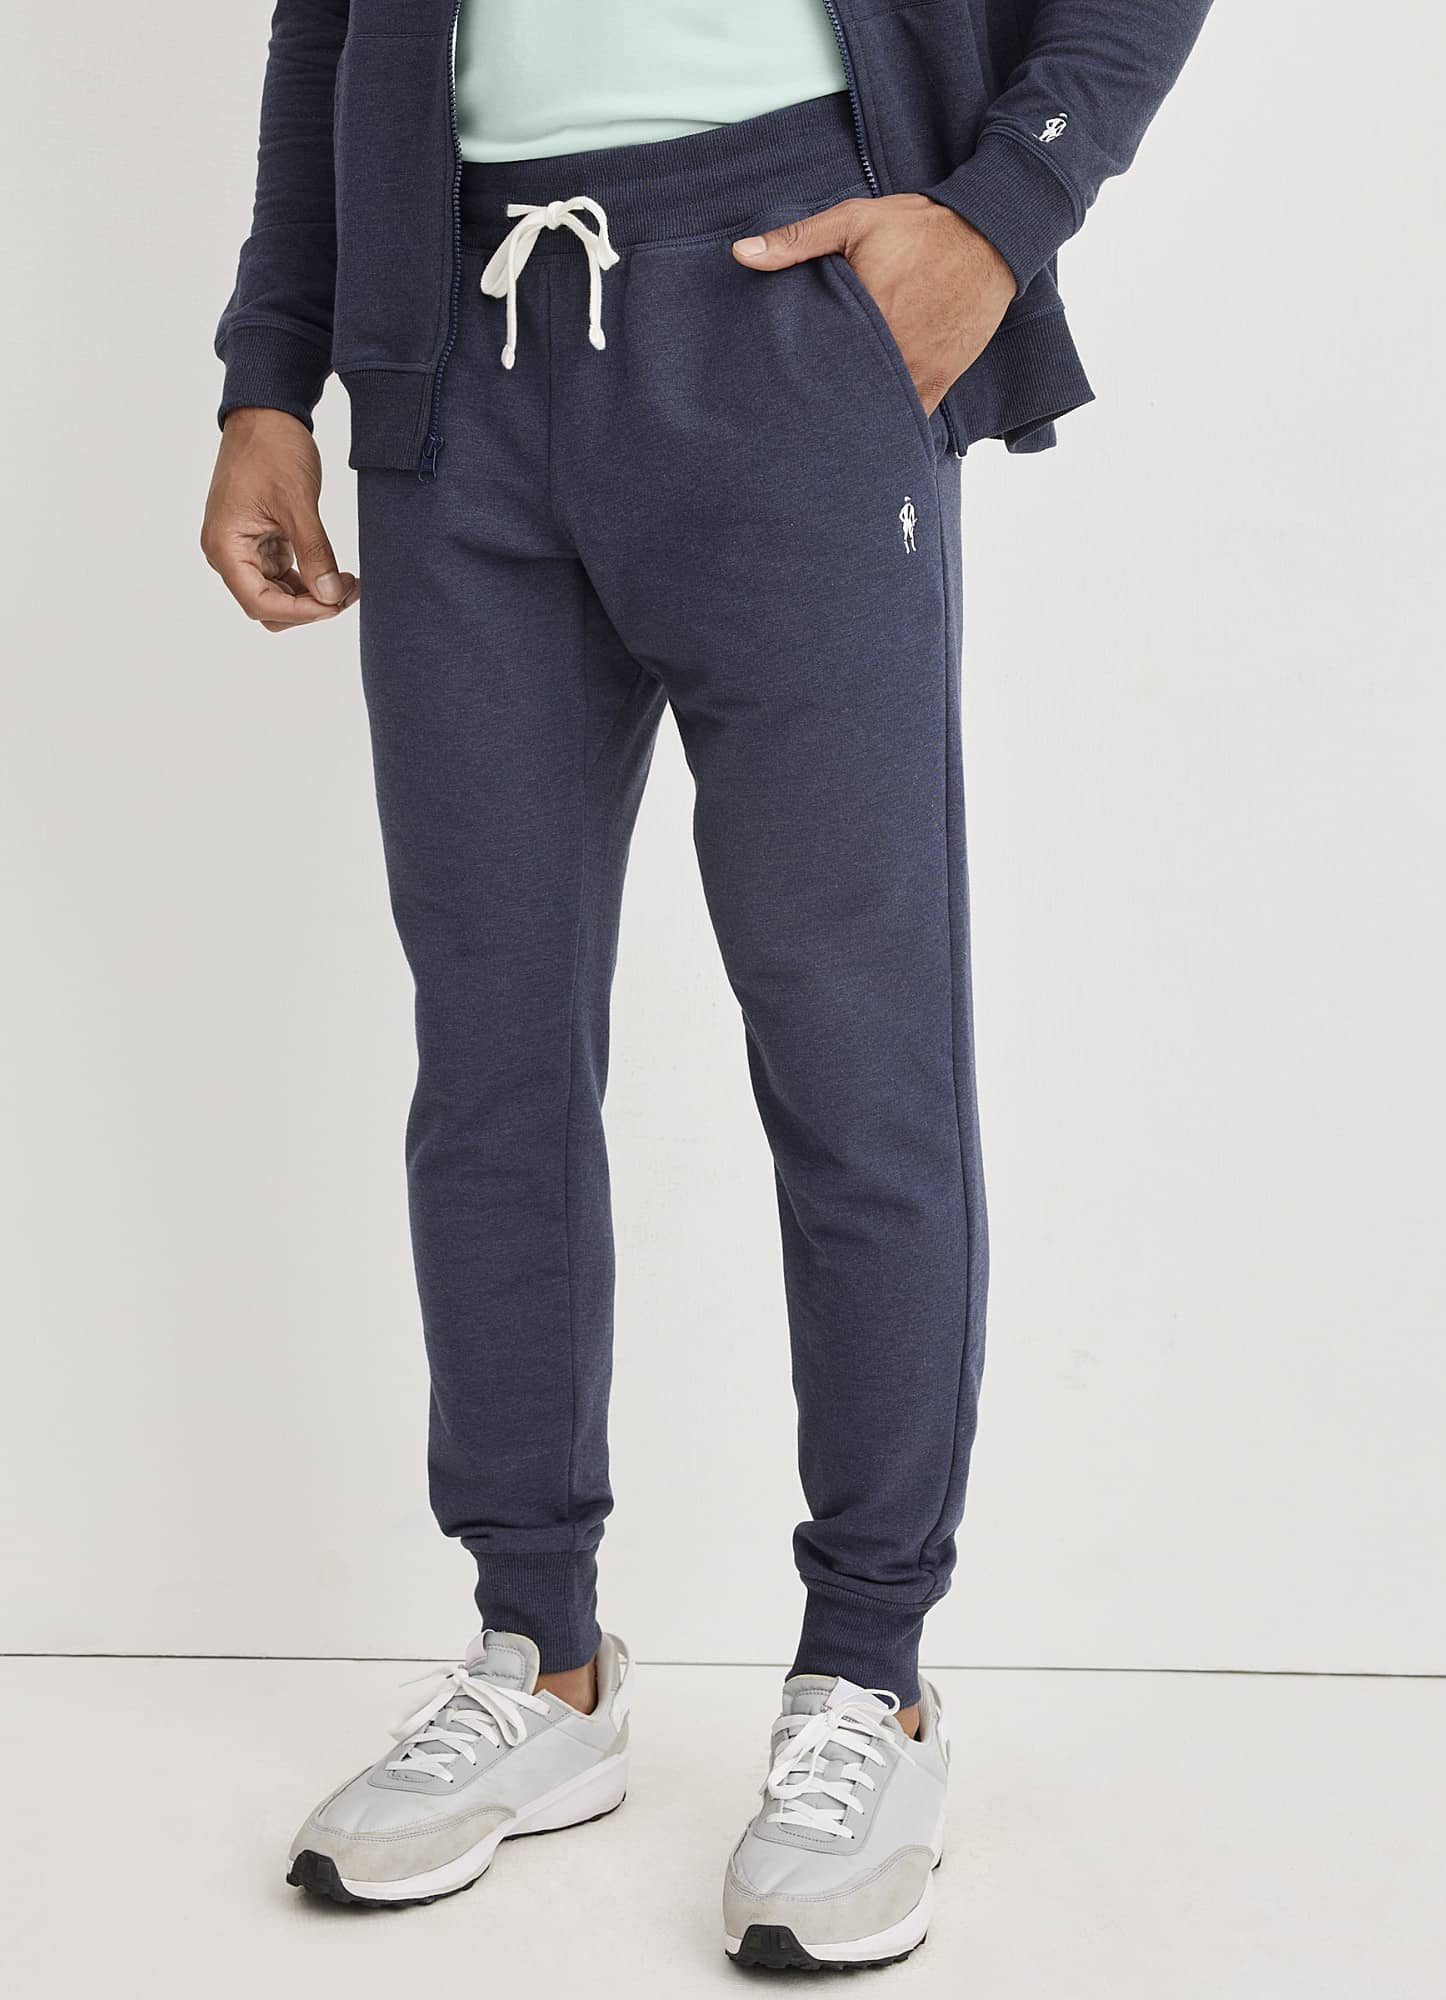 Buy Jockey Men Grey Solid Regular fit Track pants Online at Low Prices in  India - Paytmmall.com